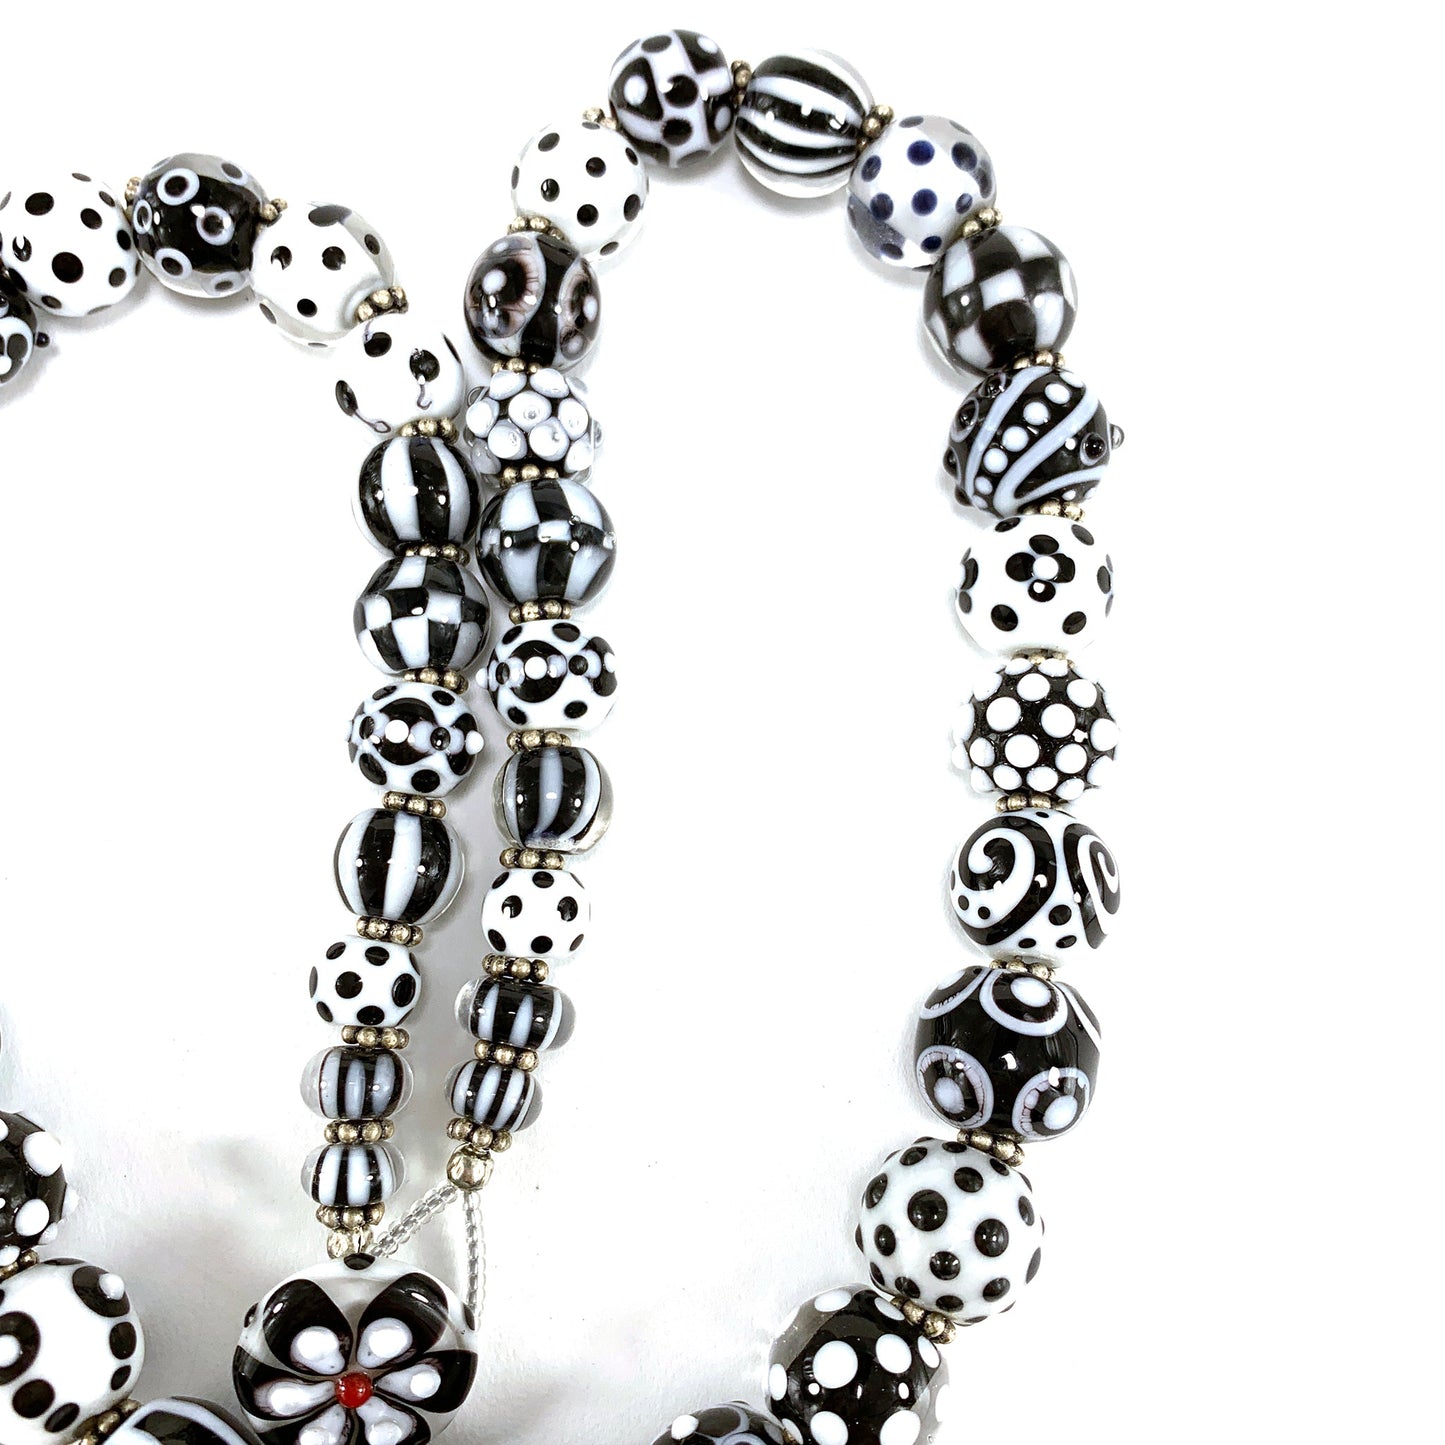 Black and White Boho Bead Collector's Necklace - The Glass Acorn